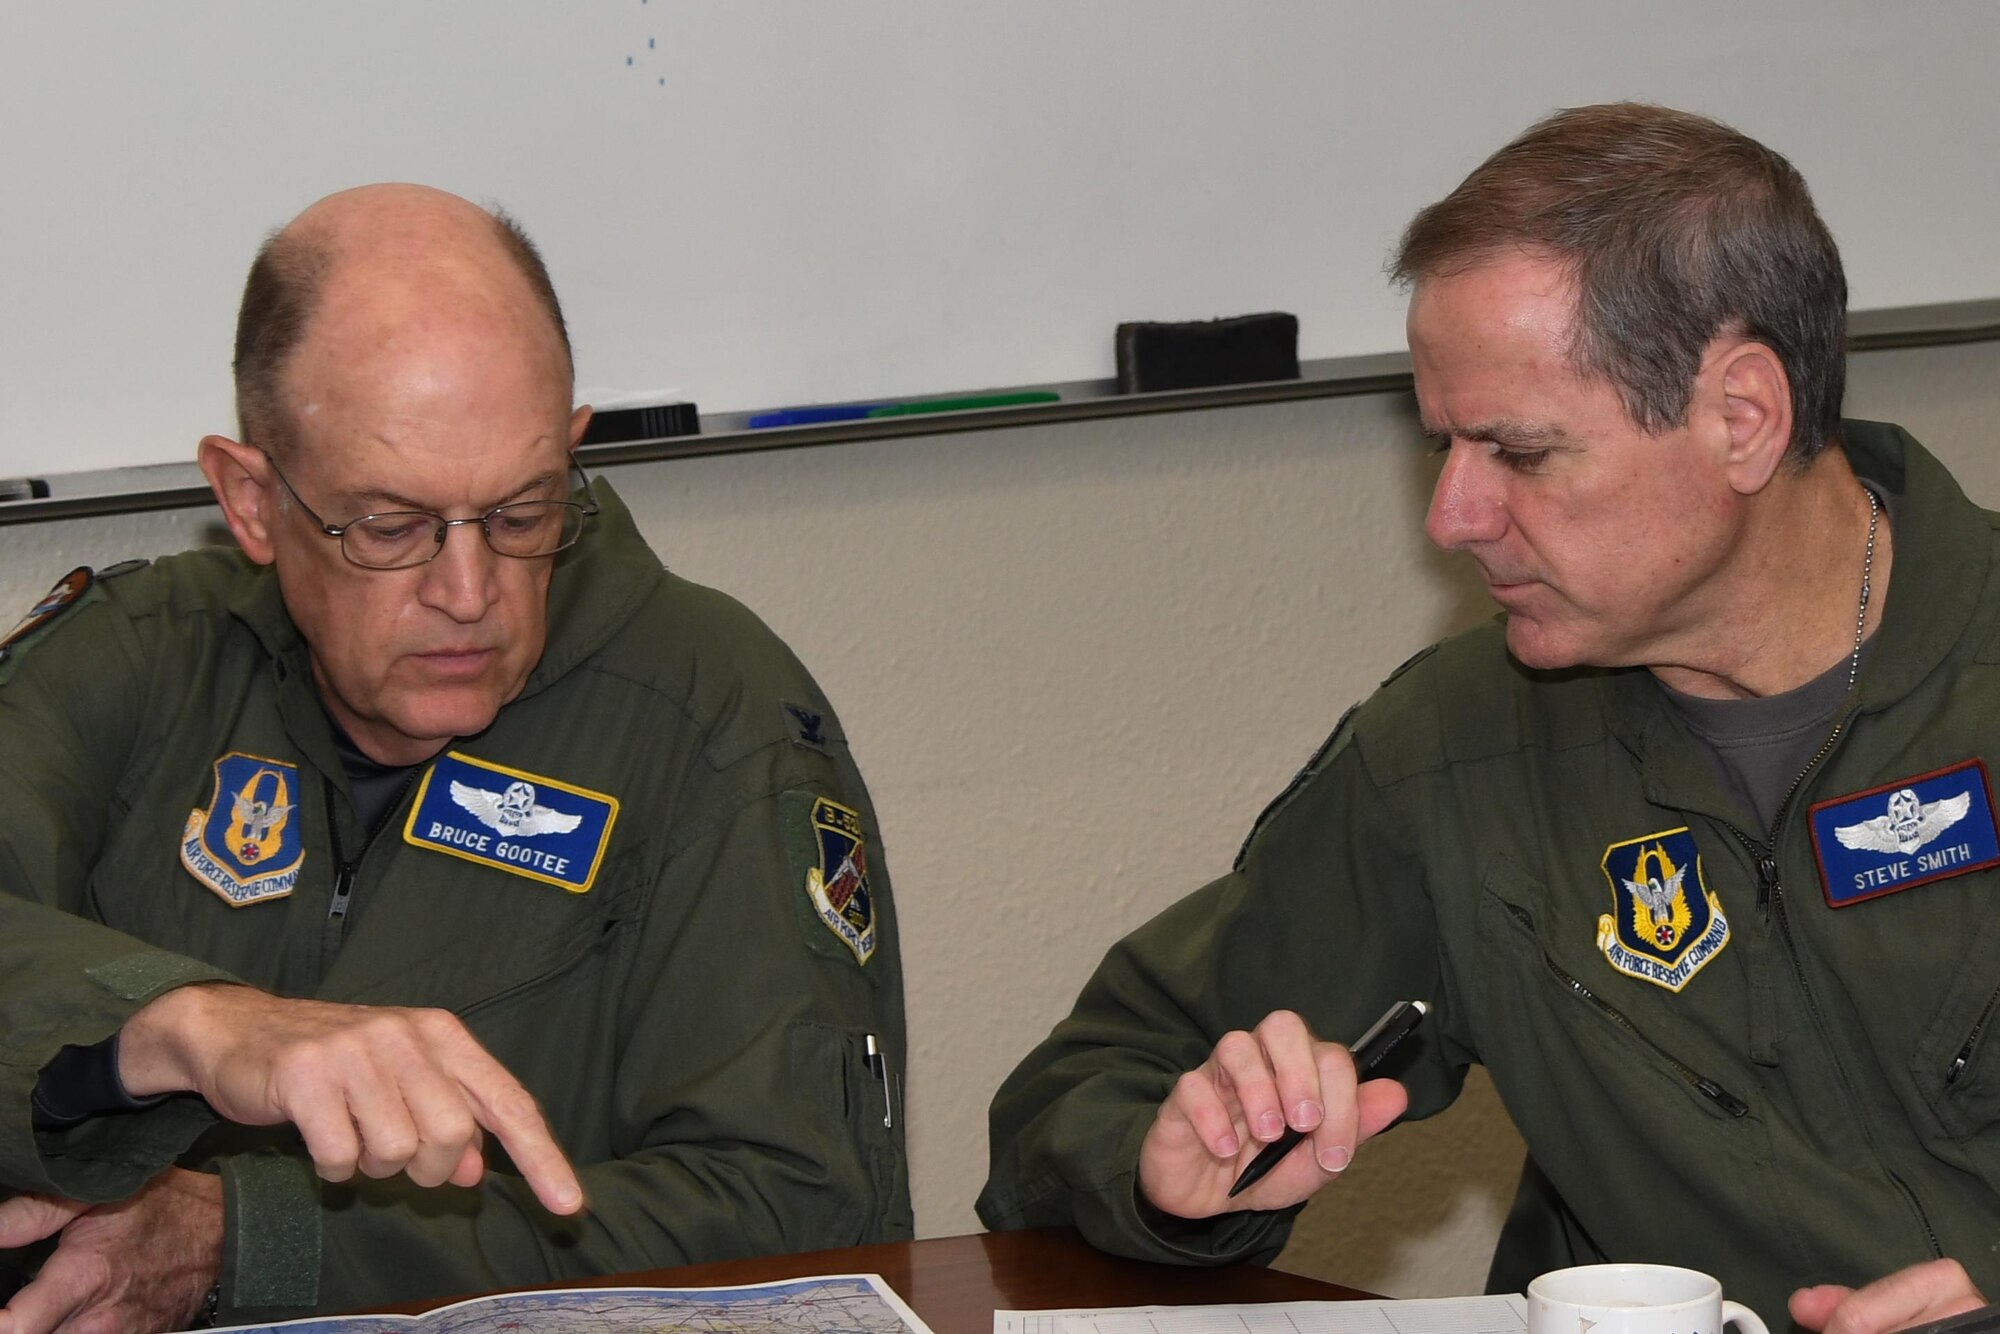 U.S. Air Force Col. Bruce Gootee, 307th Bomb Wing navigator and Lt. Col. Steve Smith, 93rd Bomb Squadron flight instructor, review a map during an early morning mission briefing at Barksdale Air Force Base, La., March 3, 2017.  The routine training mission took on great significance as it put Smith over 10,000 flight hours in the B-52 Stratofortress, a feat not accomplished in more than 30 years. (U.S. Air Force photo by Tech. Sgt. Ted Daigle/Released)